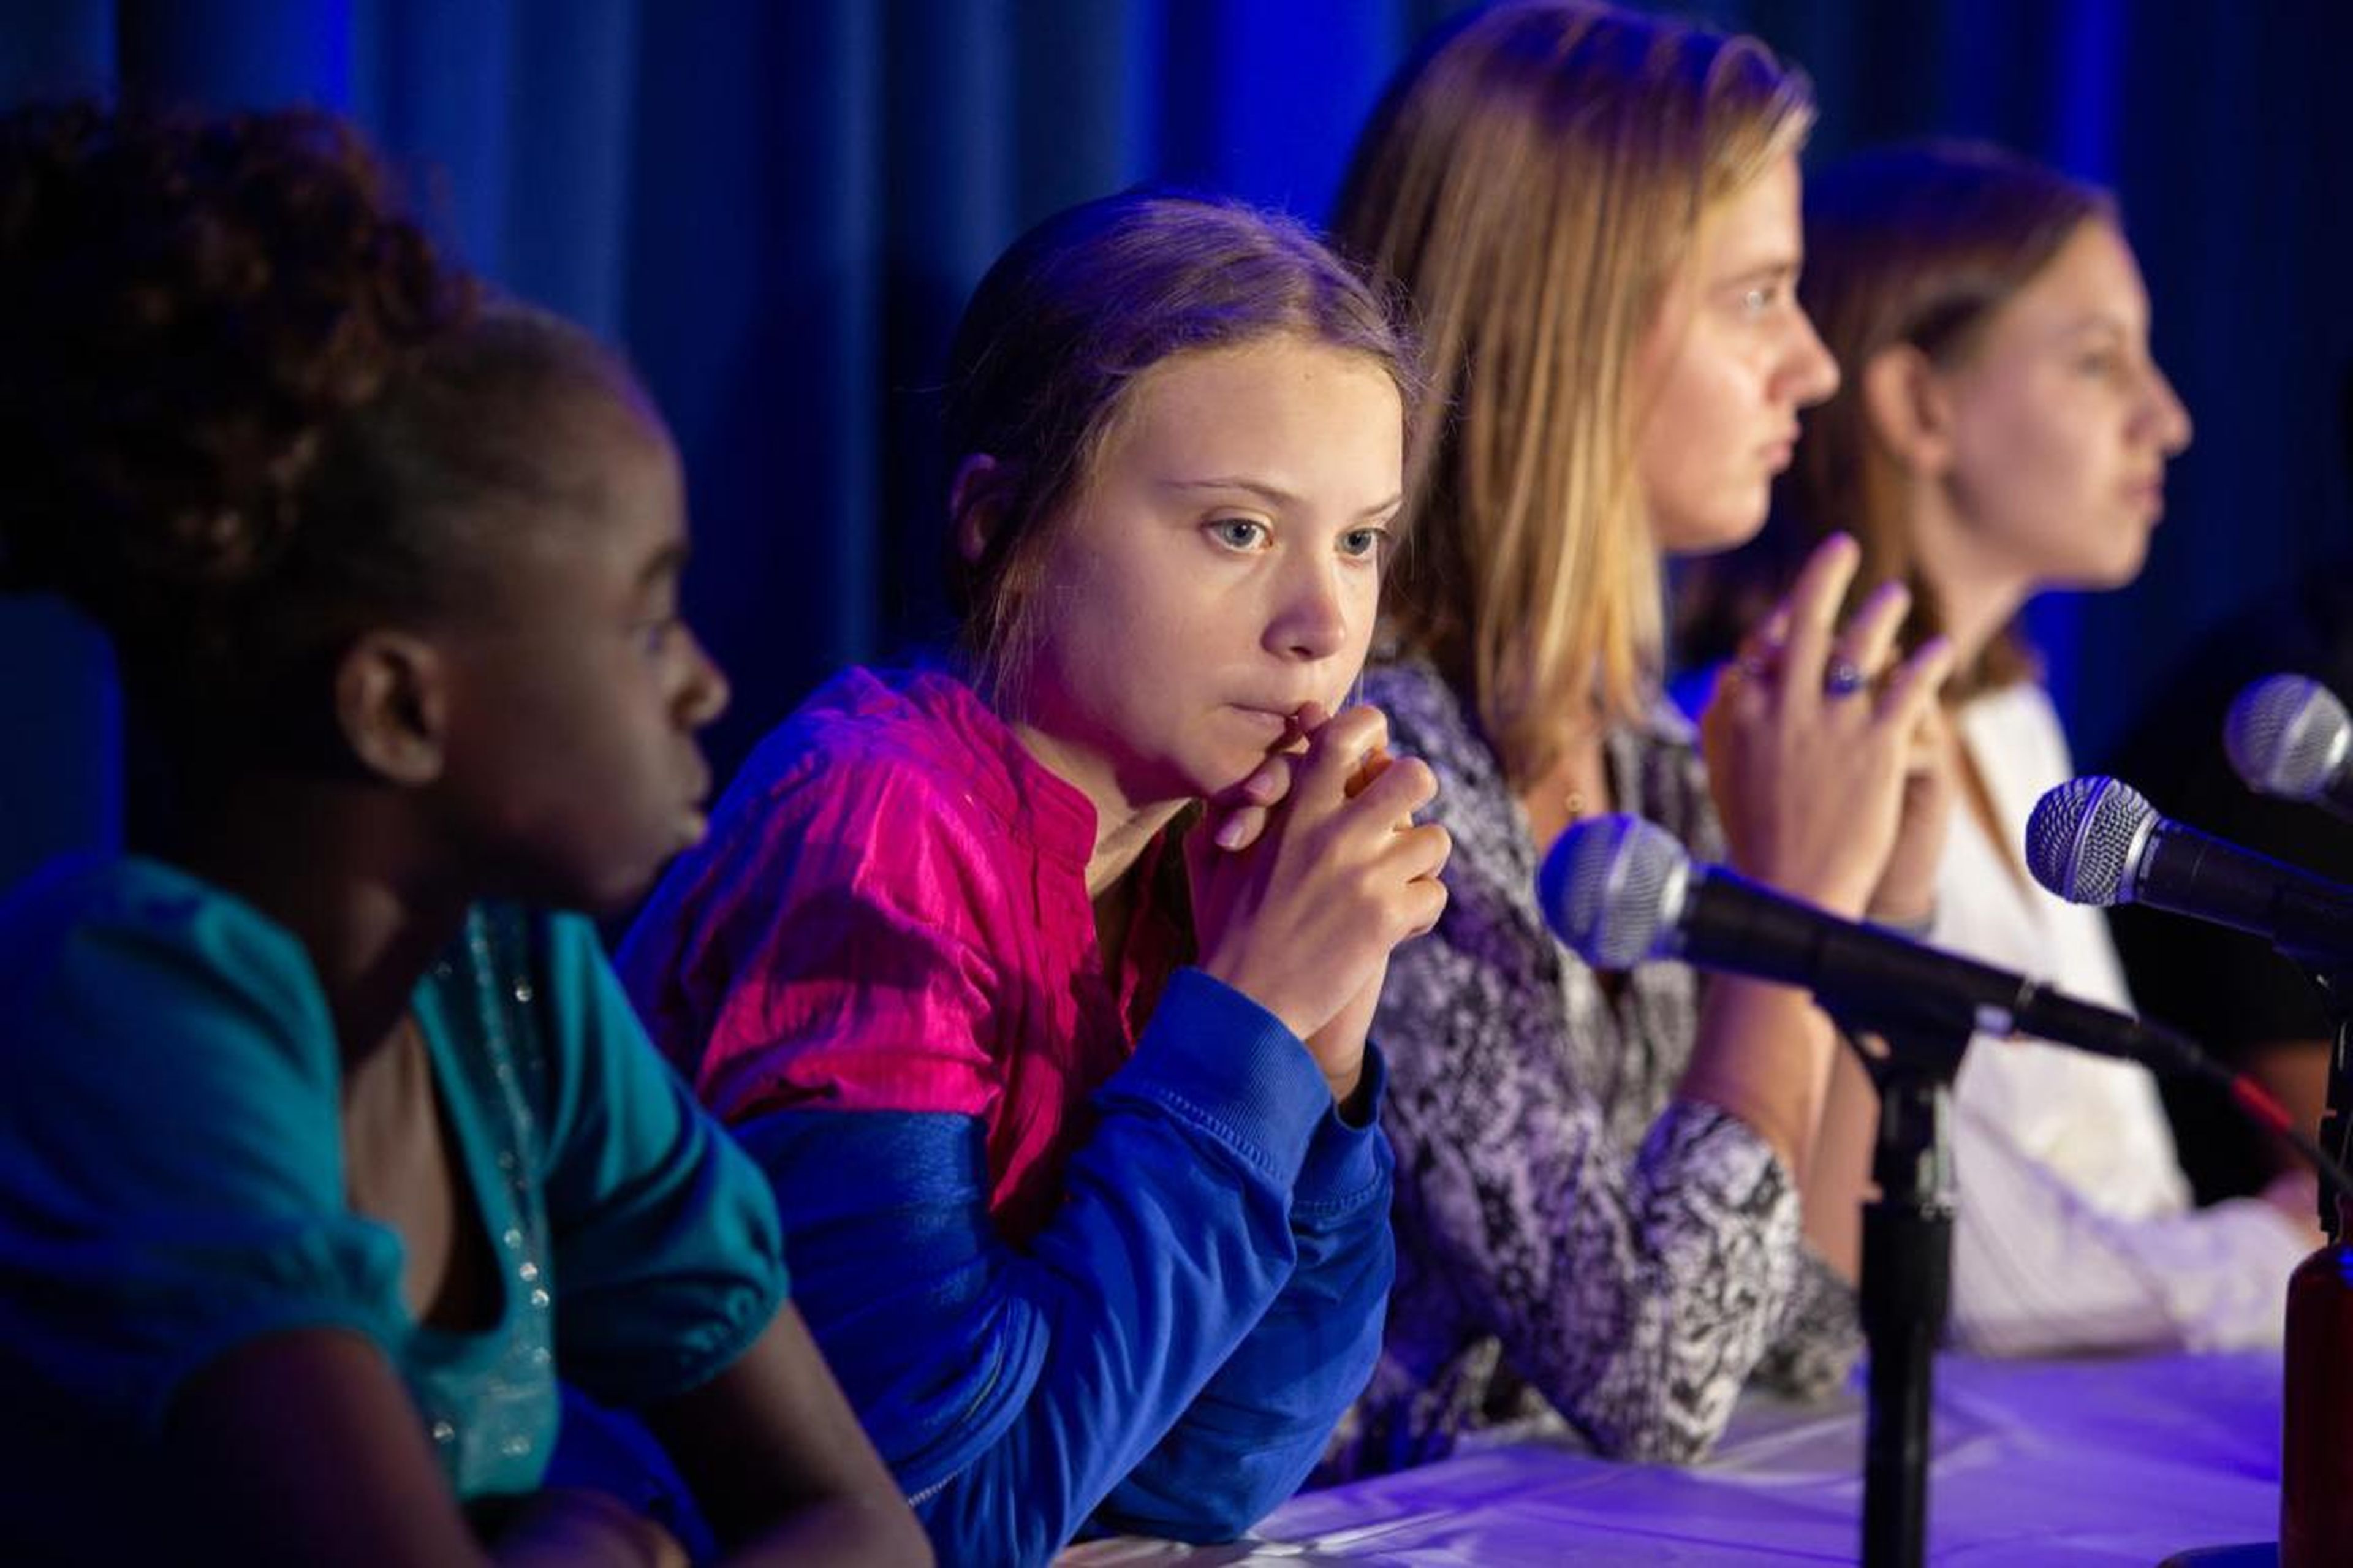 On September 23, 2019, at the UNICEF House in New York, Greta Thunberg announces a collective action being taken on behalf of young people everywhere facing the impacts of the climate crisis.